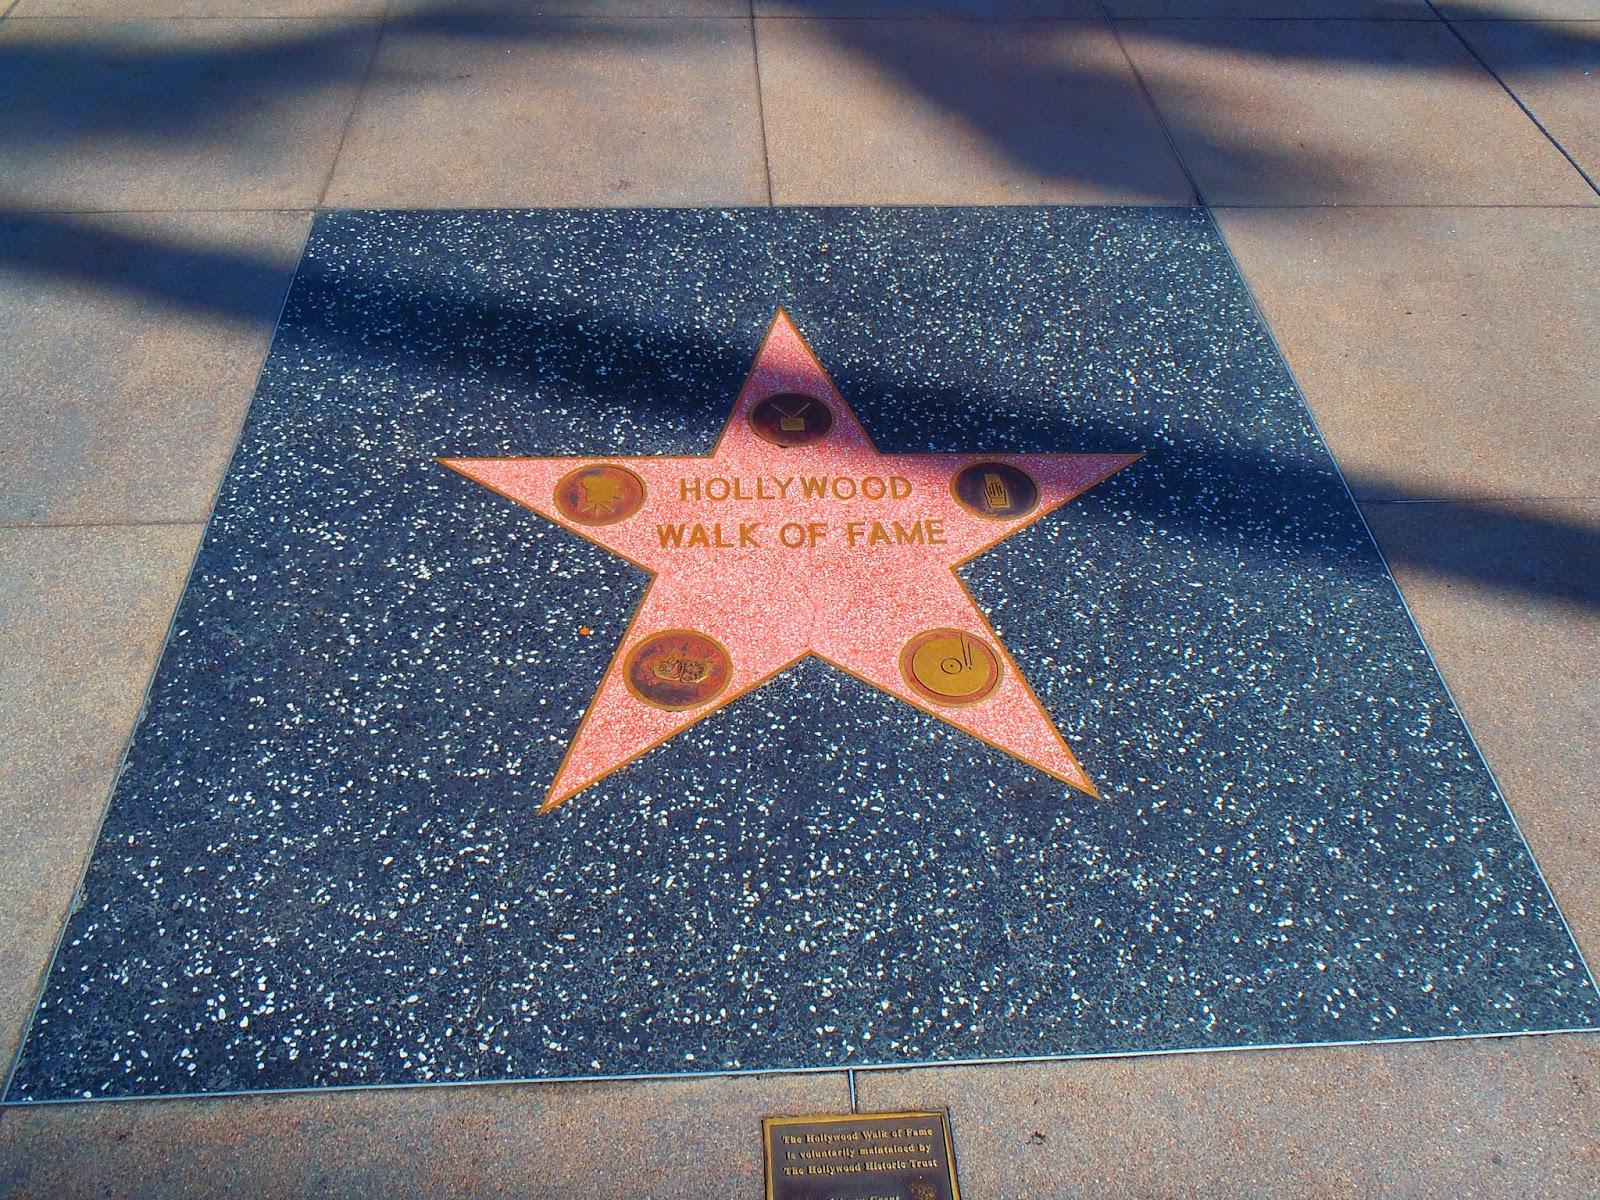 Hollywood Walk of Fame, Los Angeles, USA Aussie Flashpacker